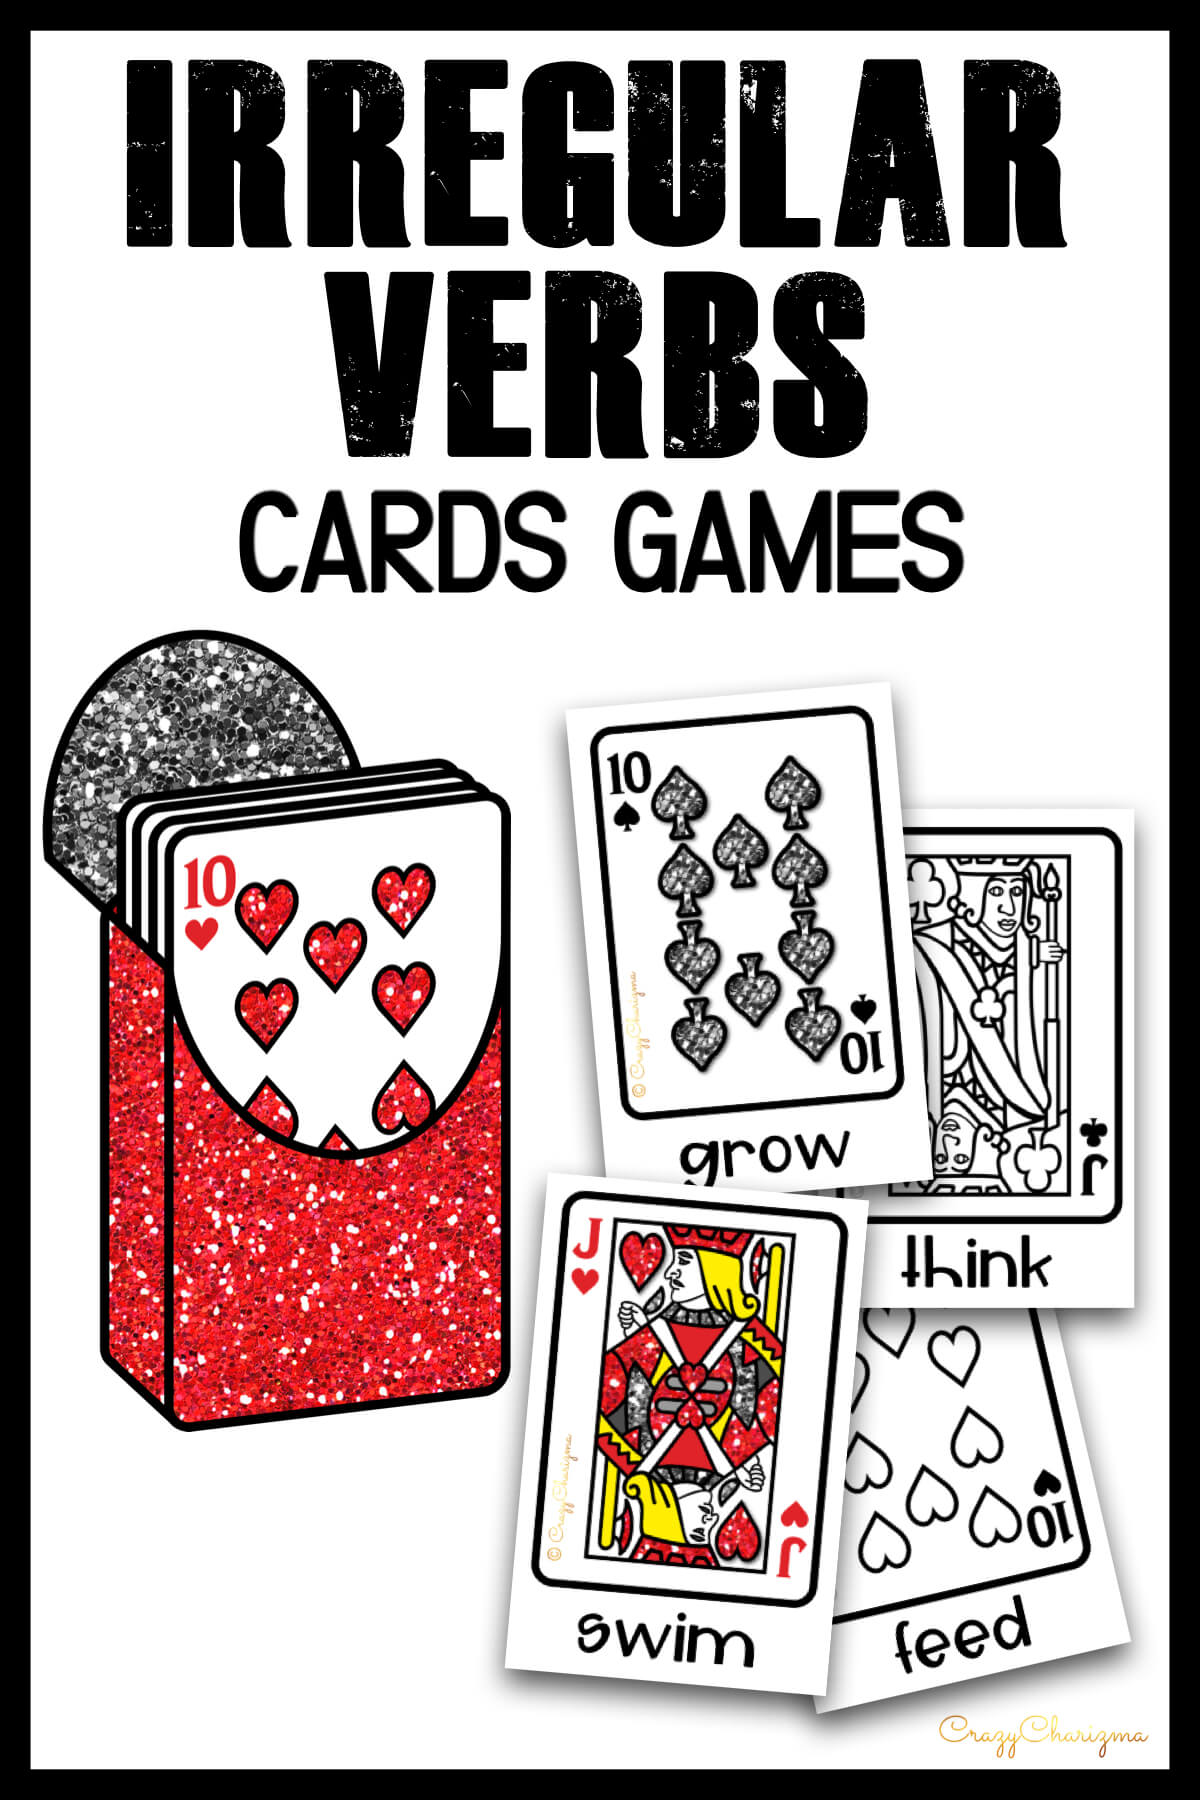 There can't be too many games to practice irregular verbs, right? Use the cards and play with irregular verbs in 10 engaging ways! Print in full color or B&W and start using in your classroom.